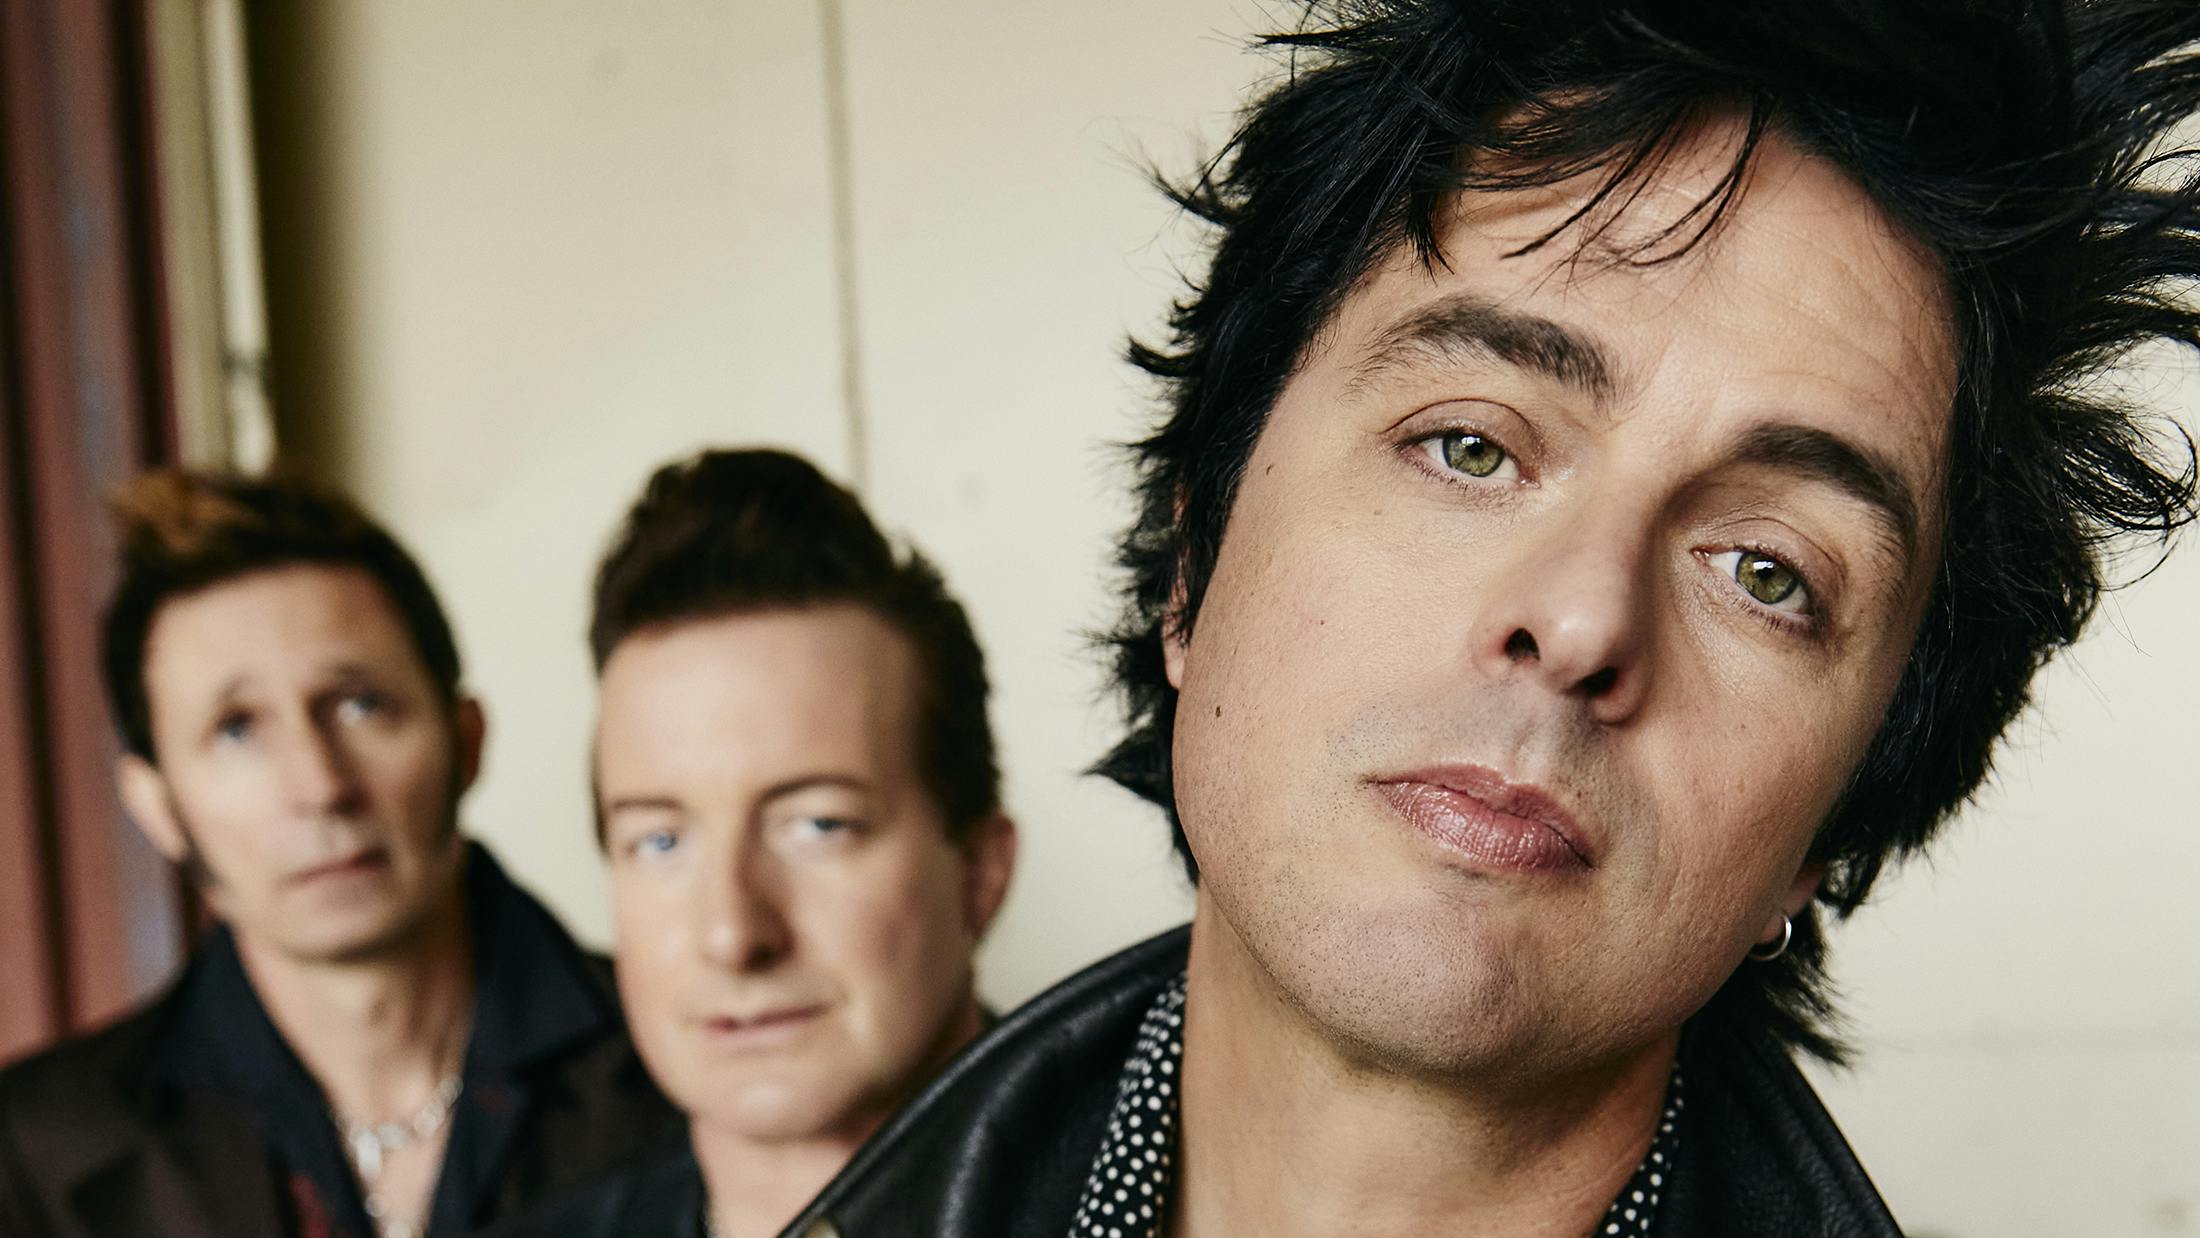 Green Day are playing a surprise intimate show this week; attendees must be fully vaccinated